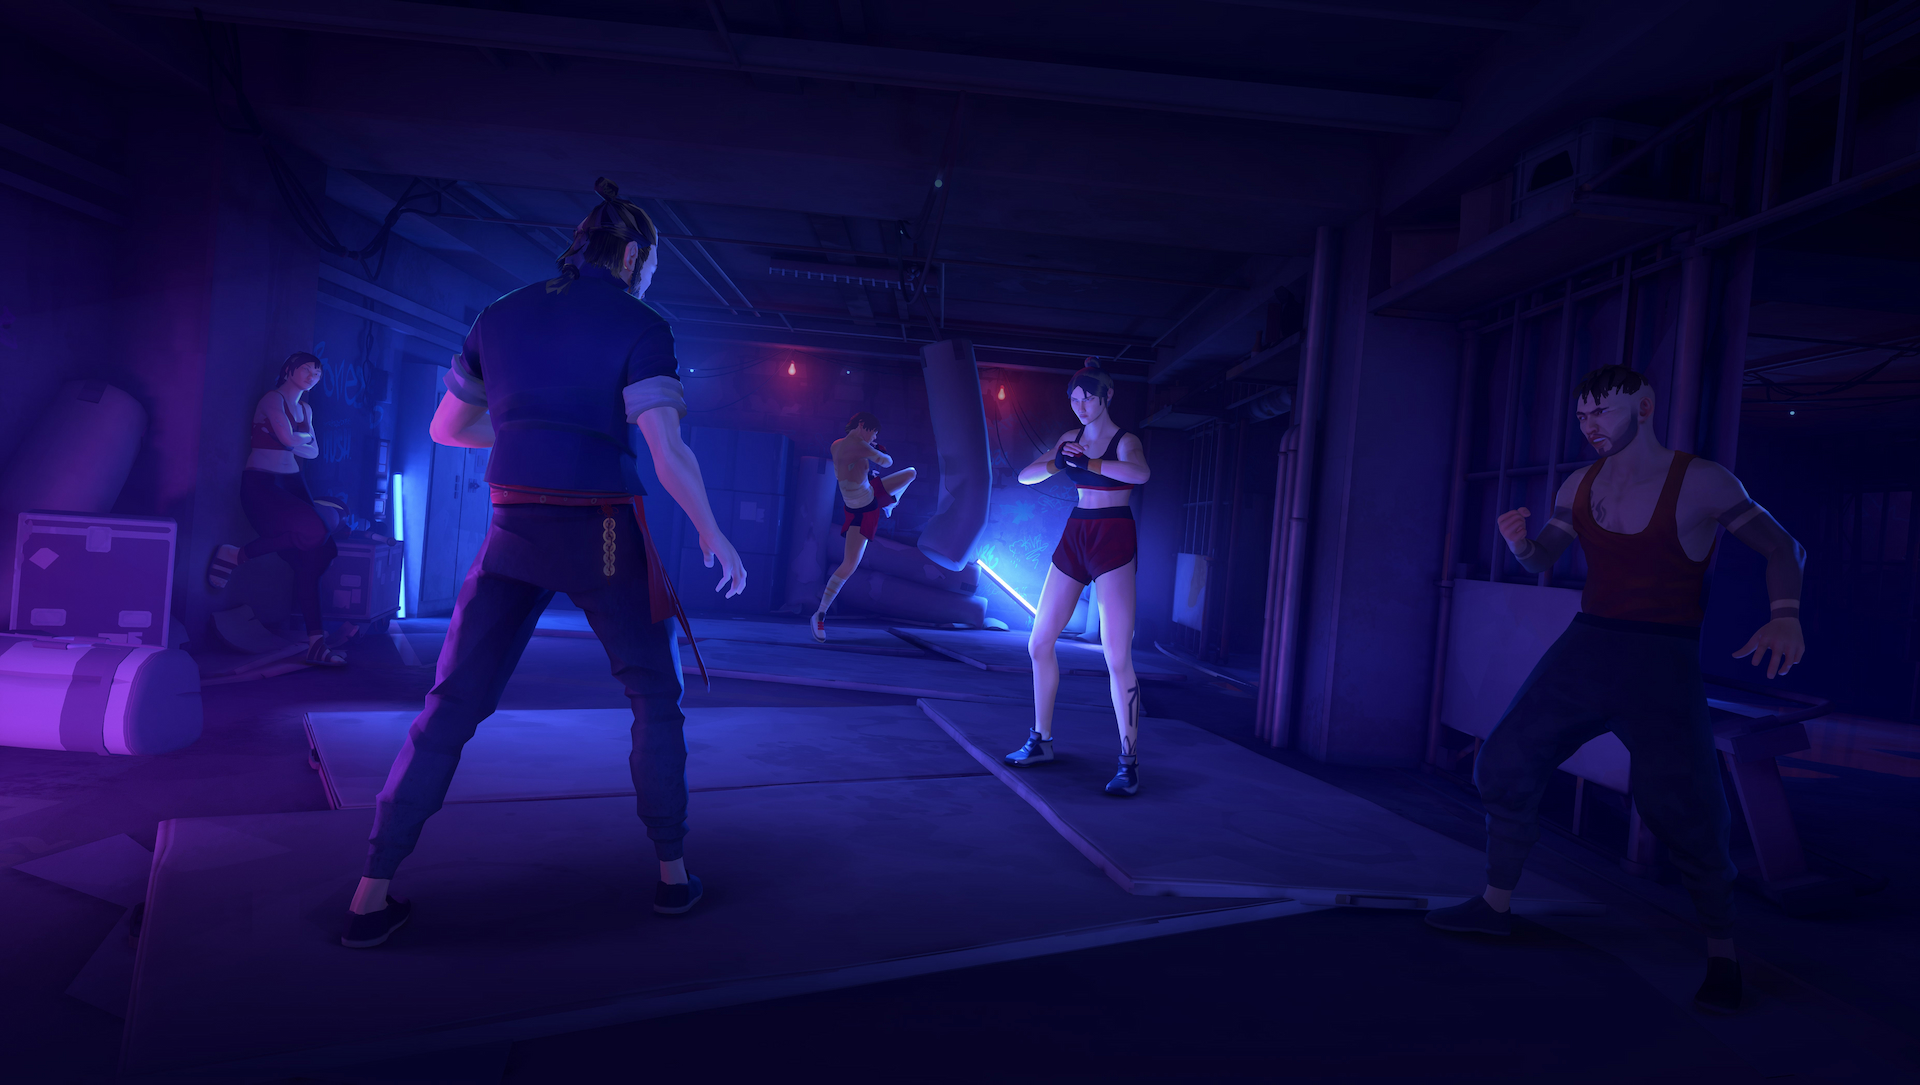 Sifu's main character facing off against opponents in a fight club.